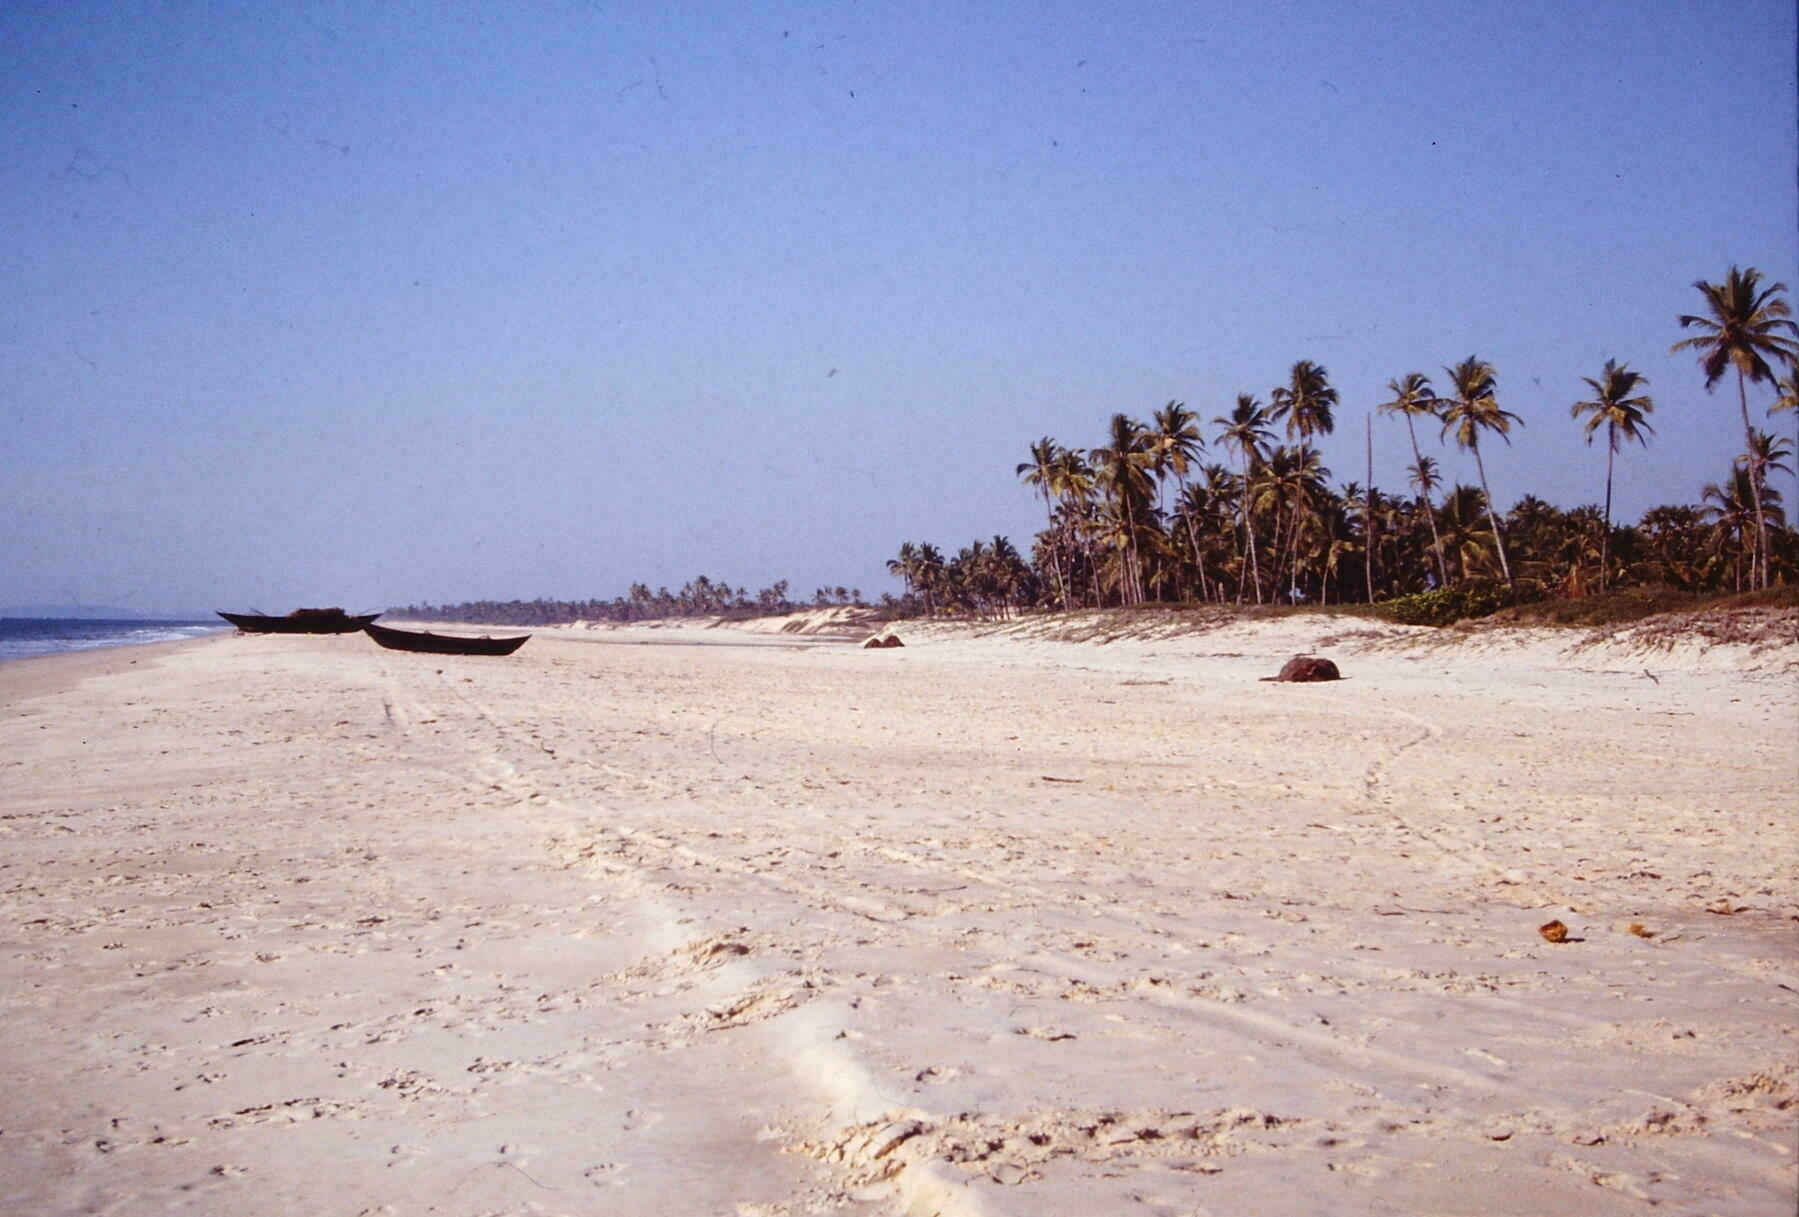 Benaulim Beach in Goa, India. A long wide stretch of white sand, no one in sight. Two local fishing boats are pulled up on the sand. Palm trees line the beach. In the distance a hill can be seen.